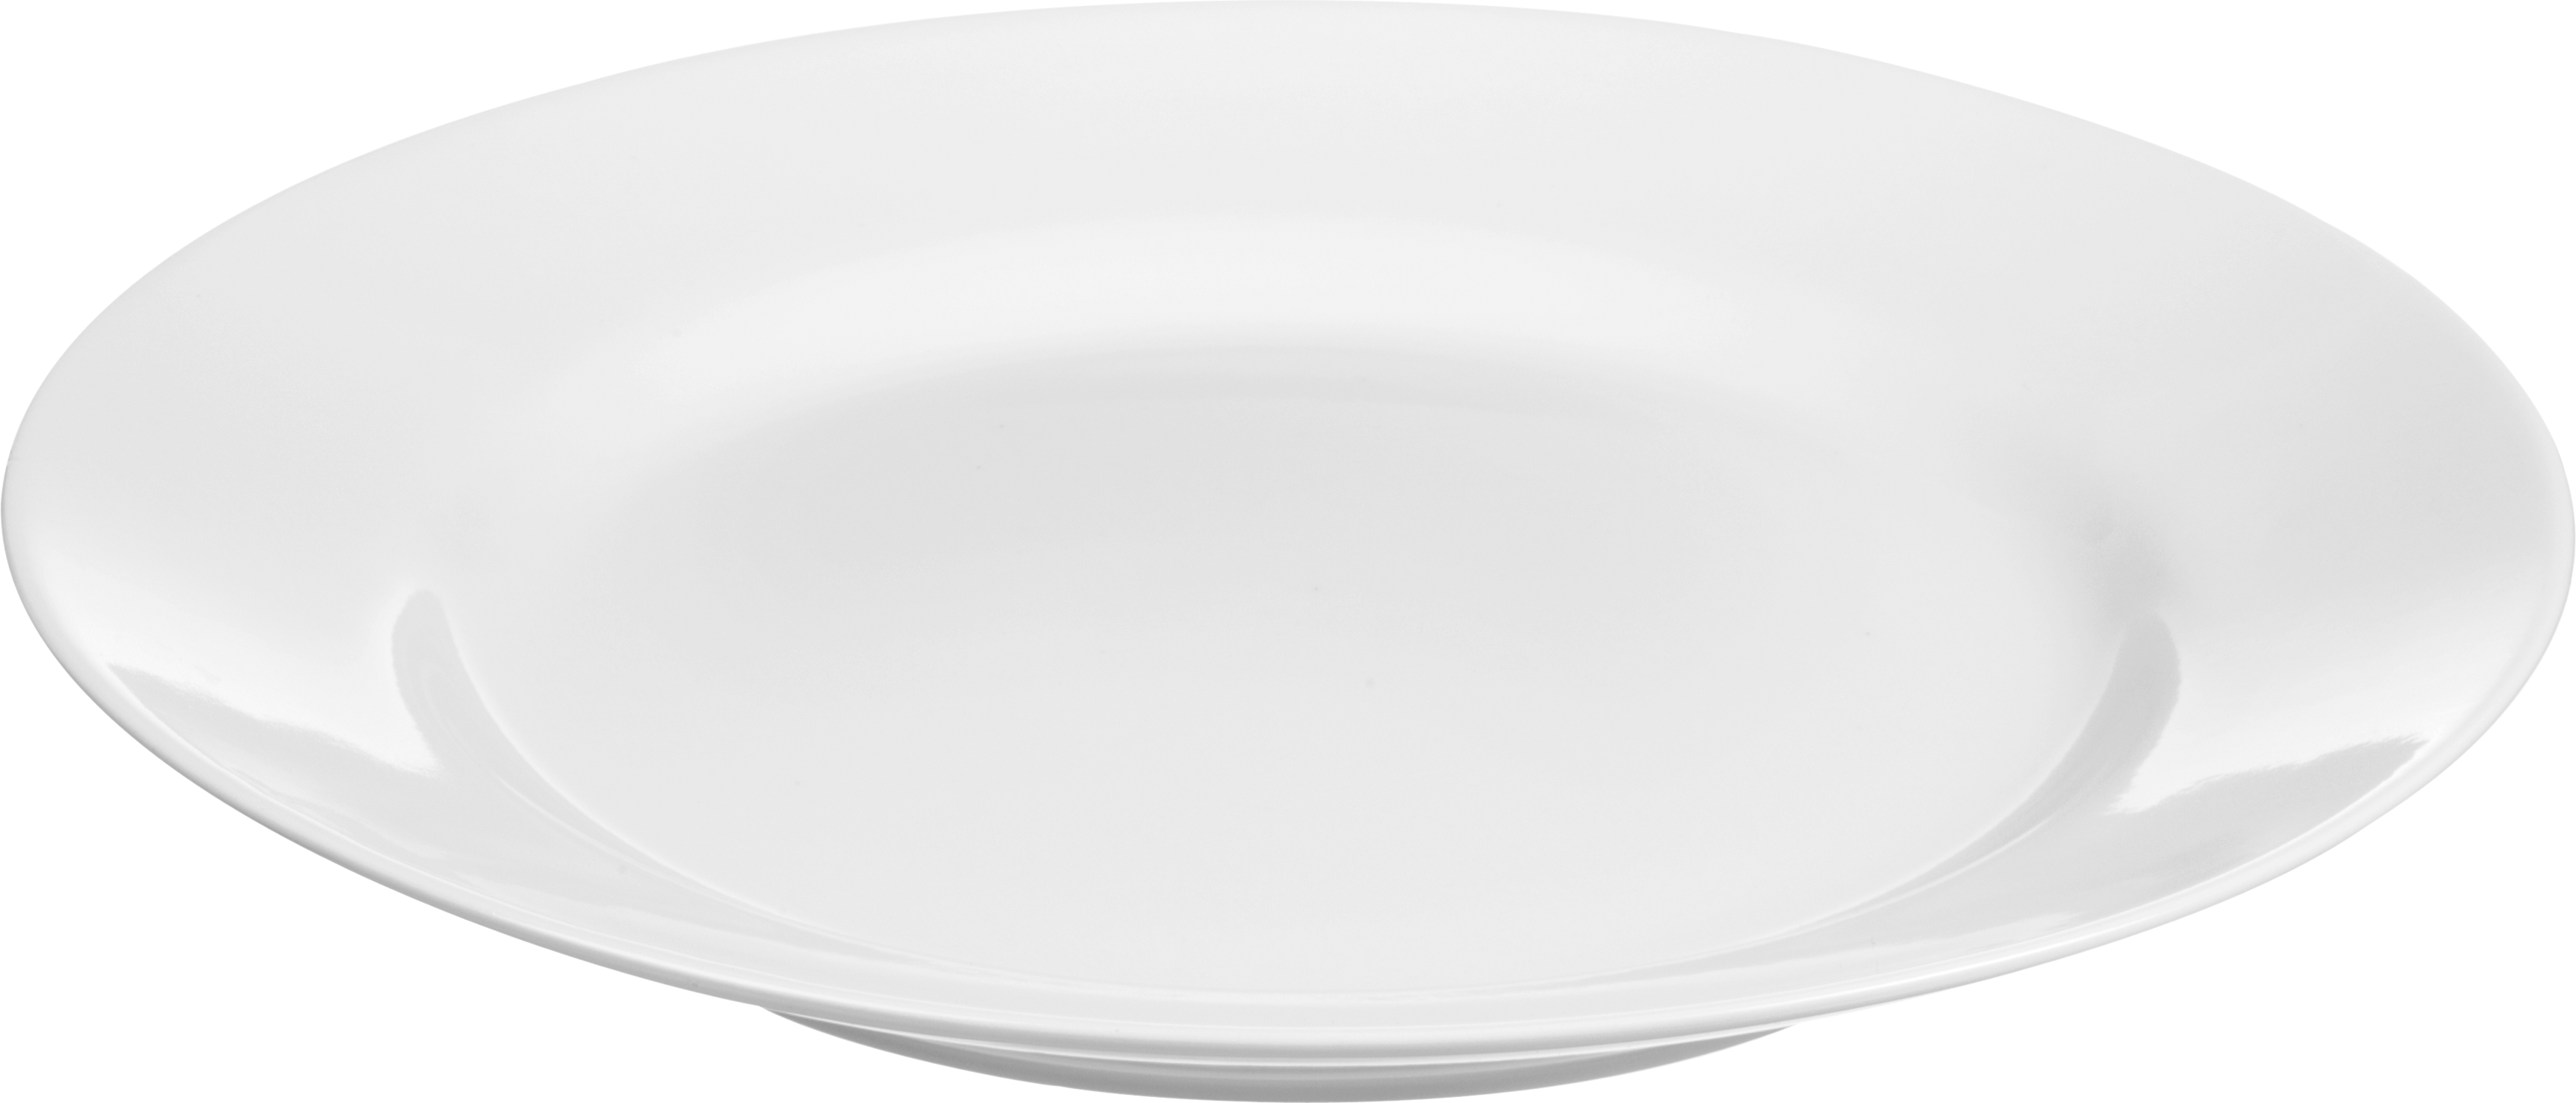 Plate PNG File